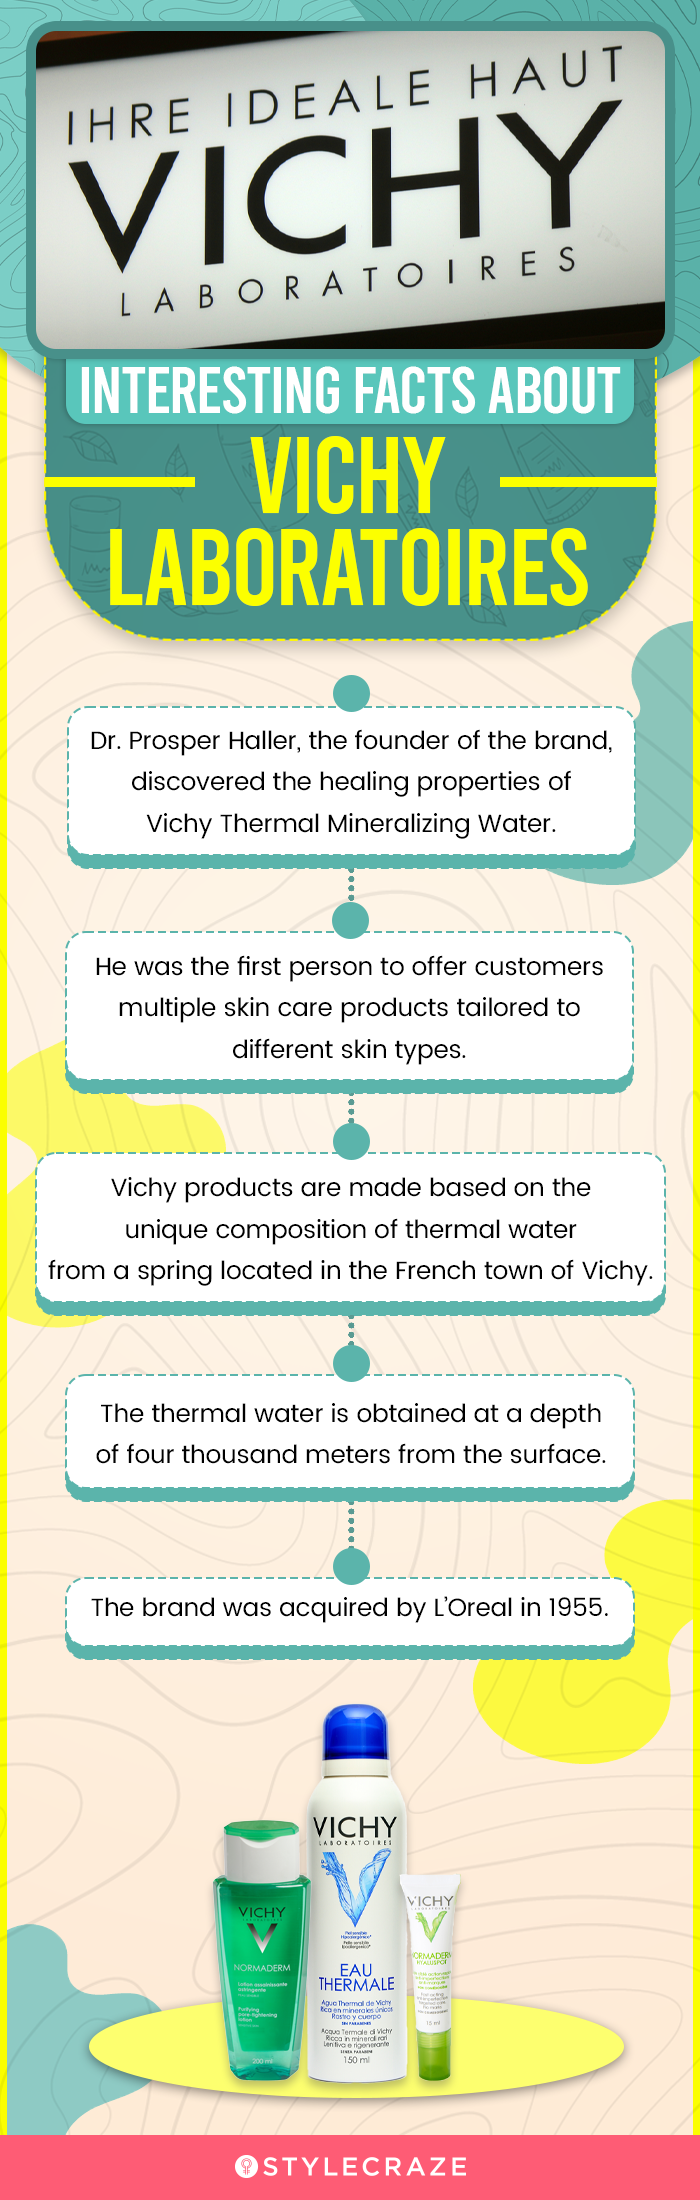 Interesting Facts About Vichy Laboratoires (infographic)